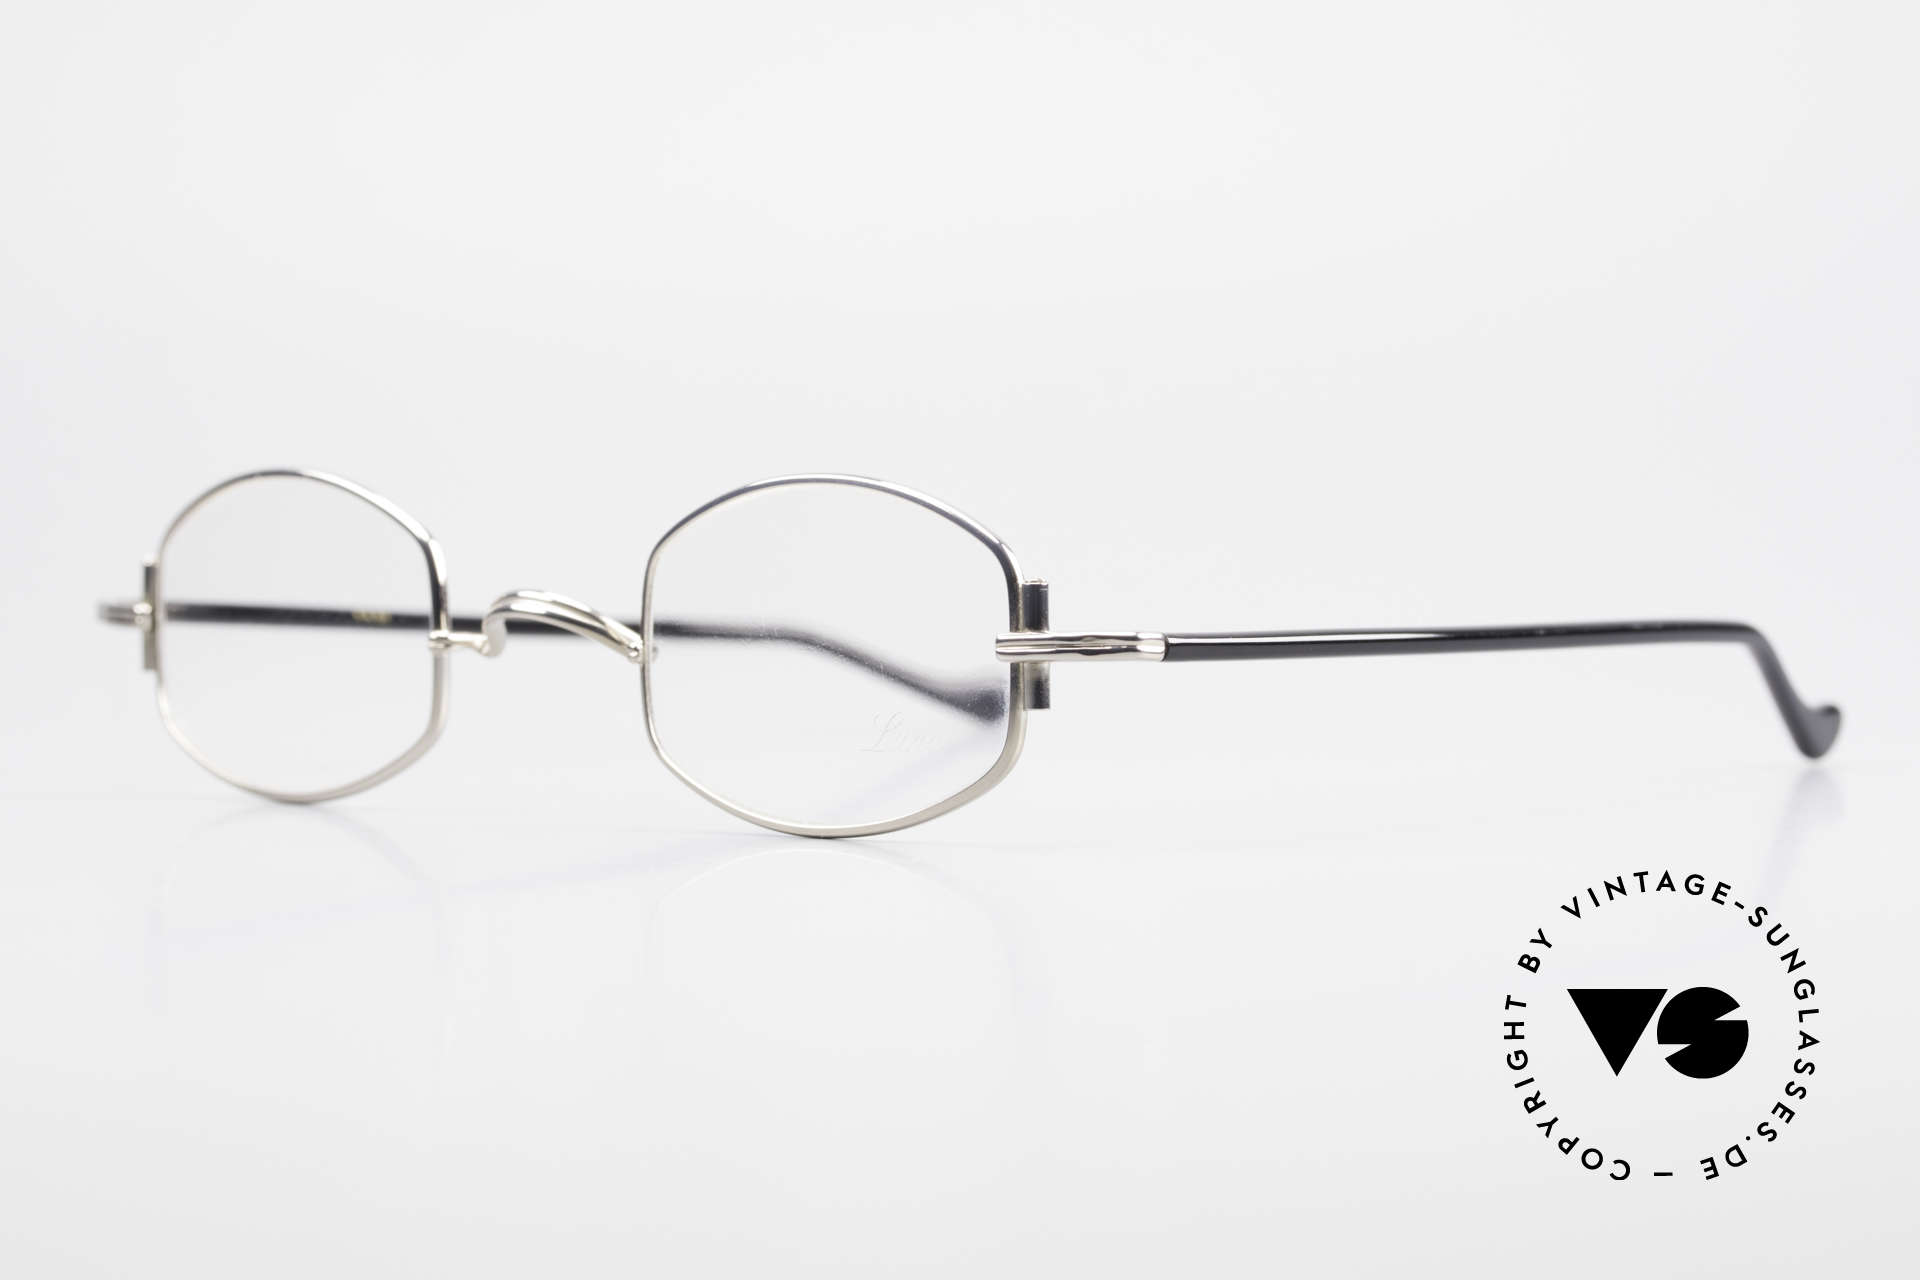 Lunor XA 03 No Retro Lunor Glasses Vintage, well-known for the "W-bridge" & the plain frame designs, Made for Men and Women